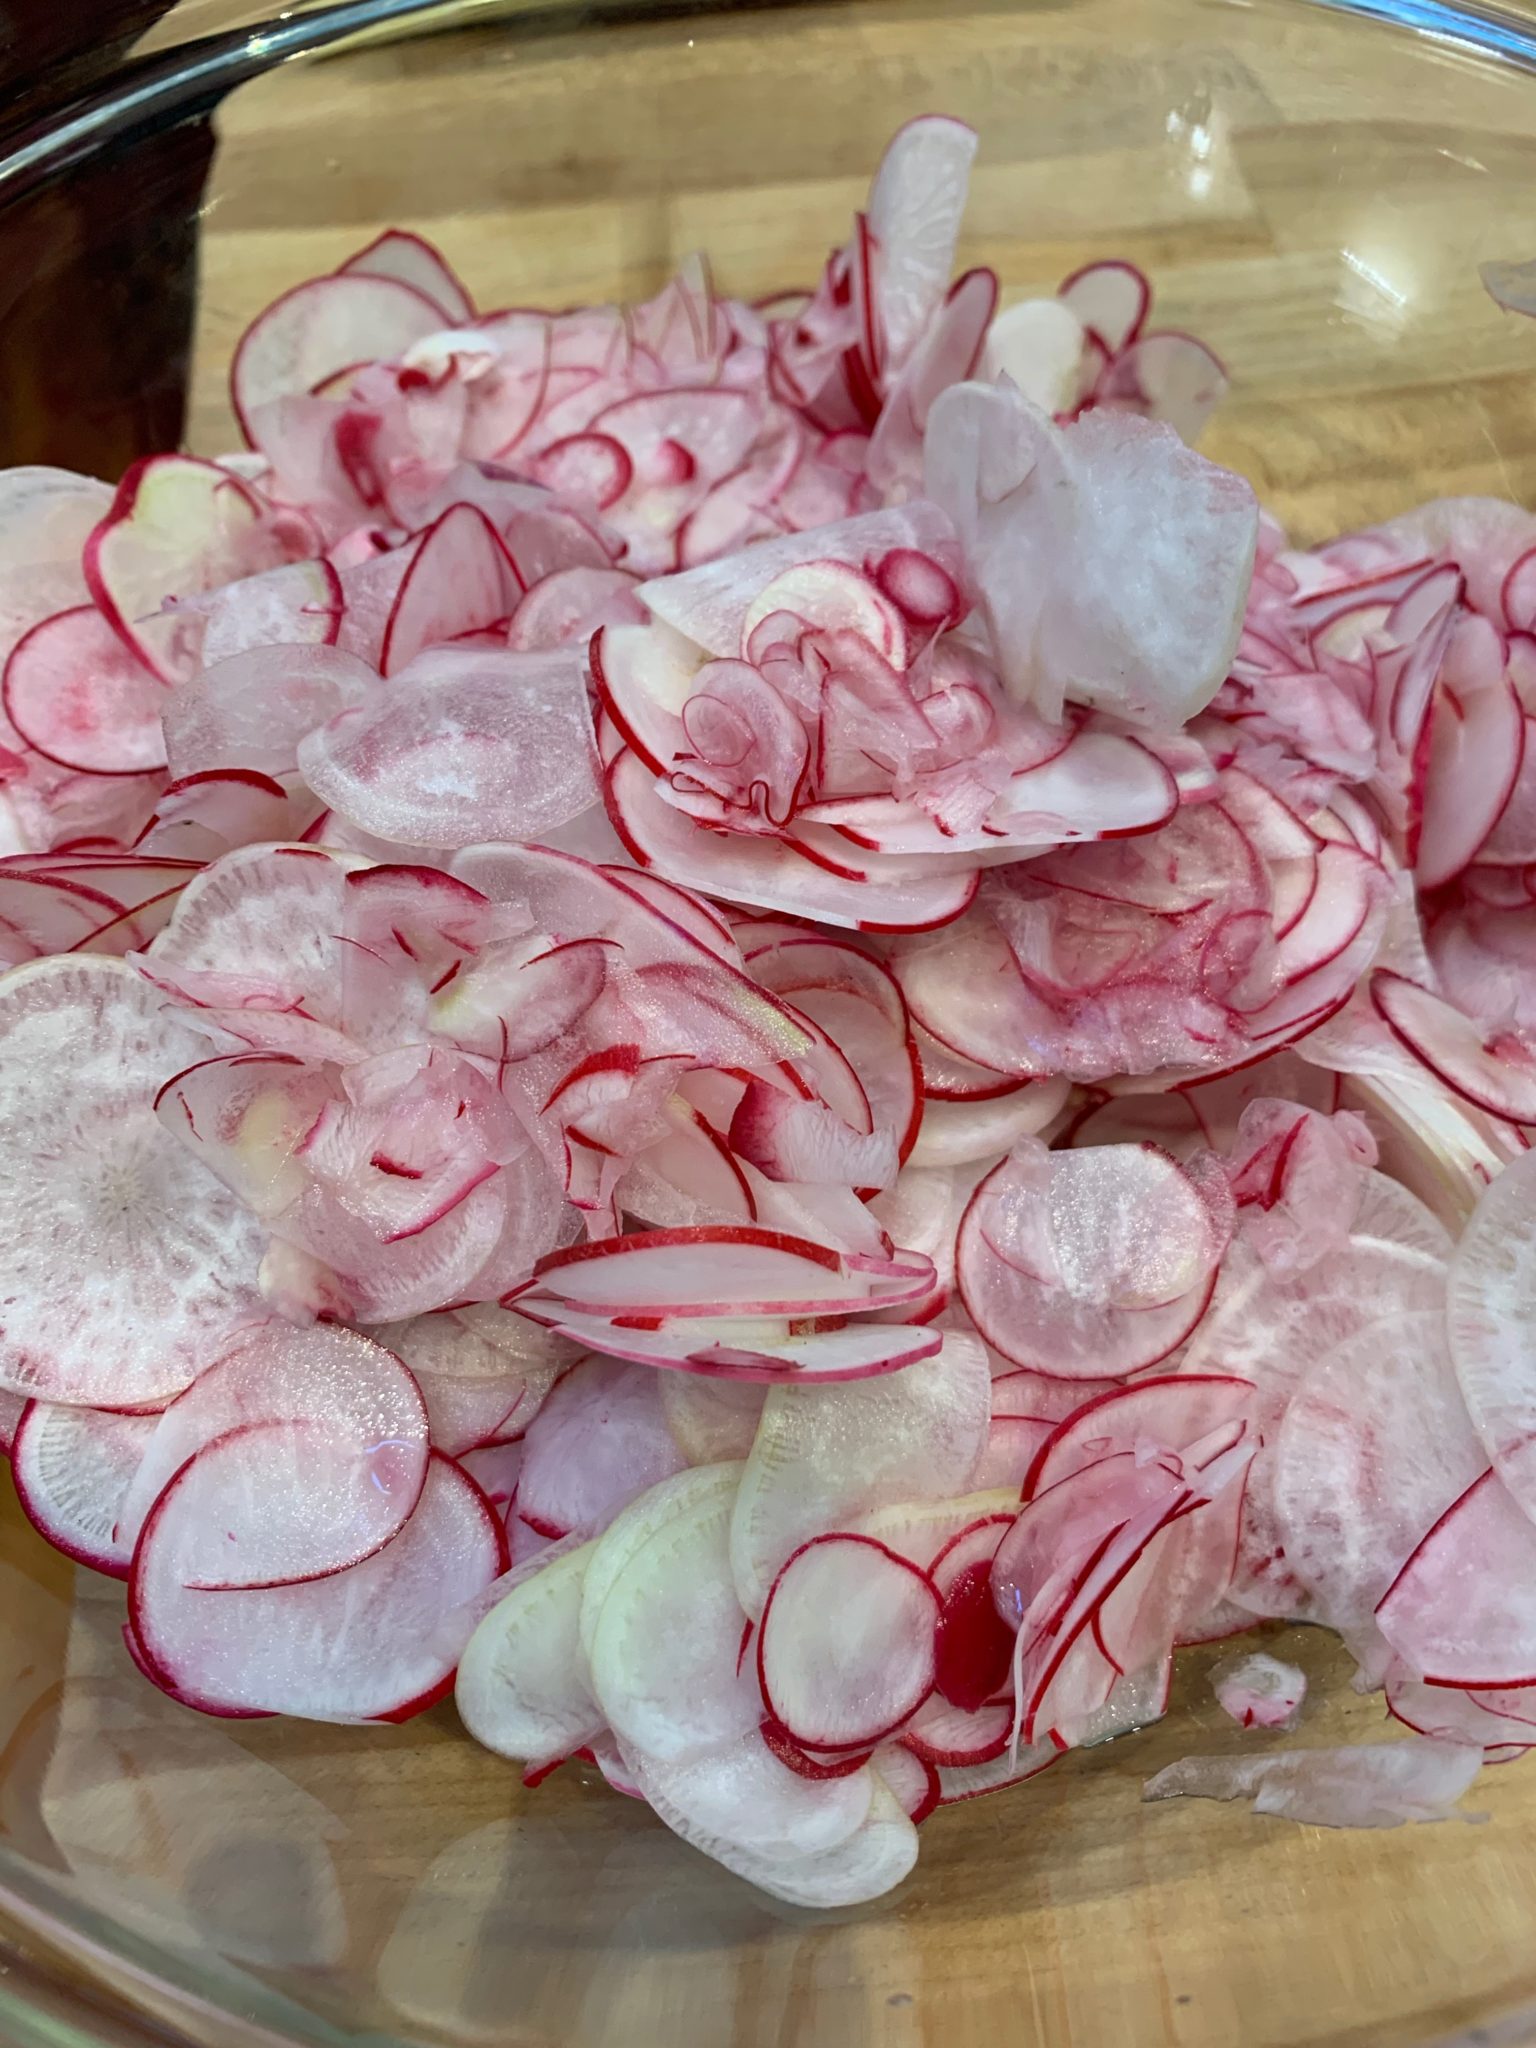 Thin sliced radishes in a glass bowl